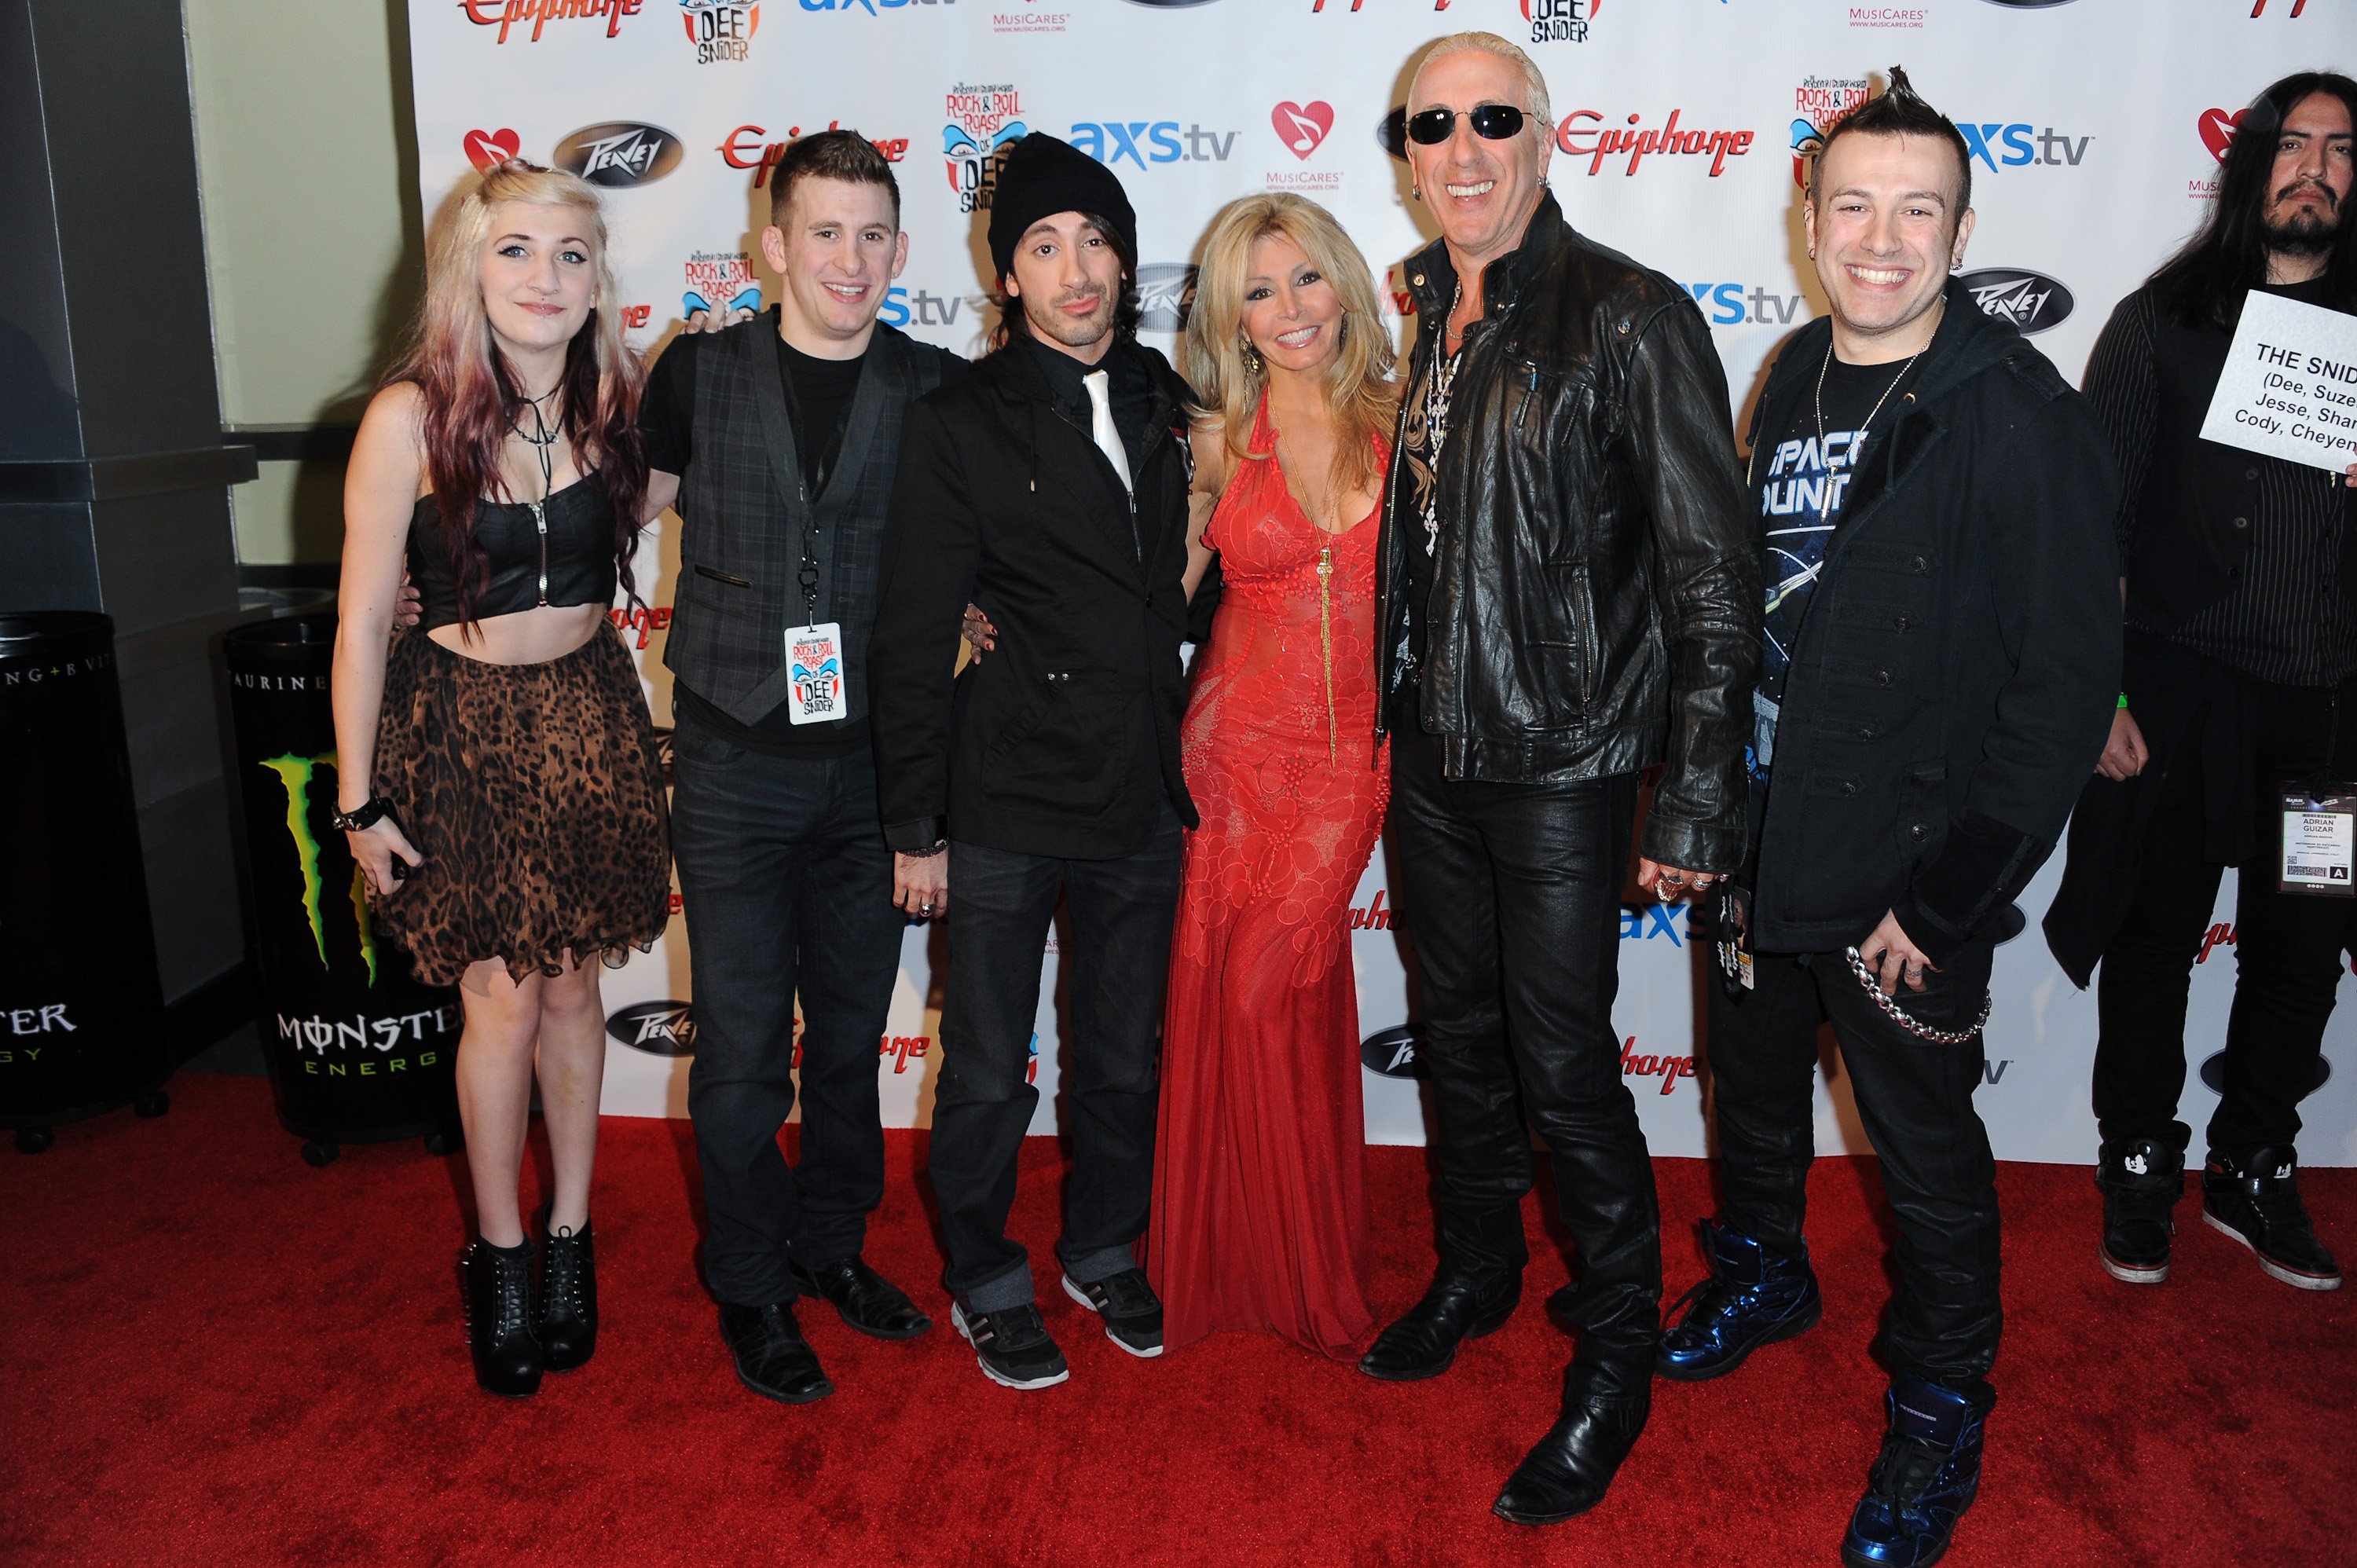 Dee Snider, wife Suzette Snider and their kids at the Revolver/Guitar World Rock & Roll roast of Dee Snider at City National Grove of Anaheim on January 24, 2013, in Anaheim, California. | Source: Getty Images